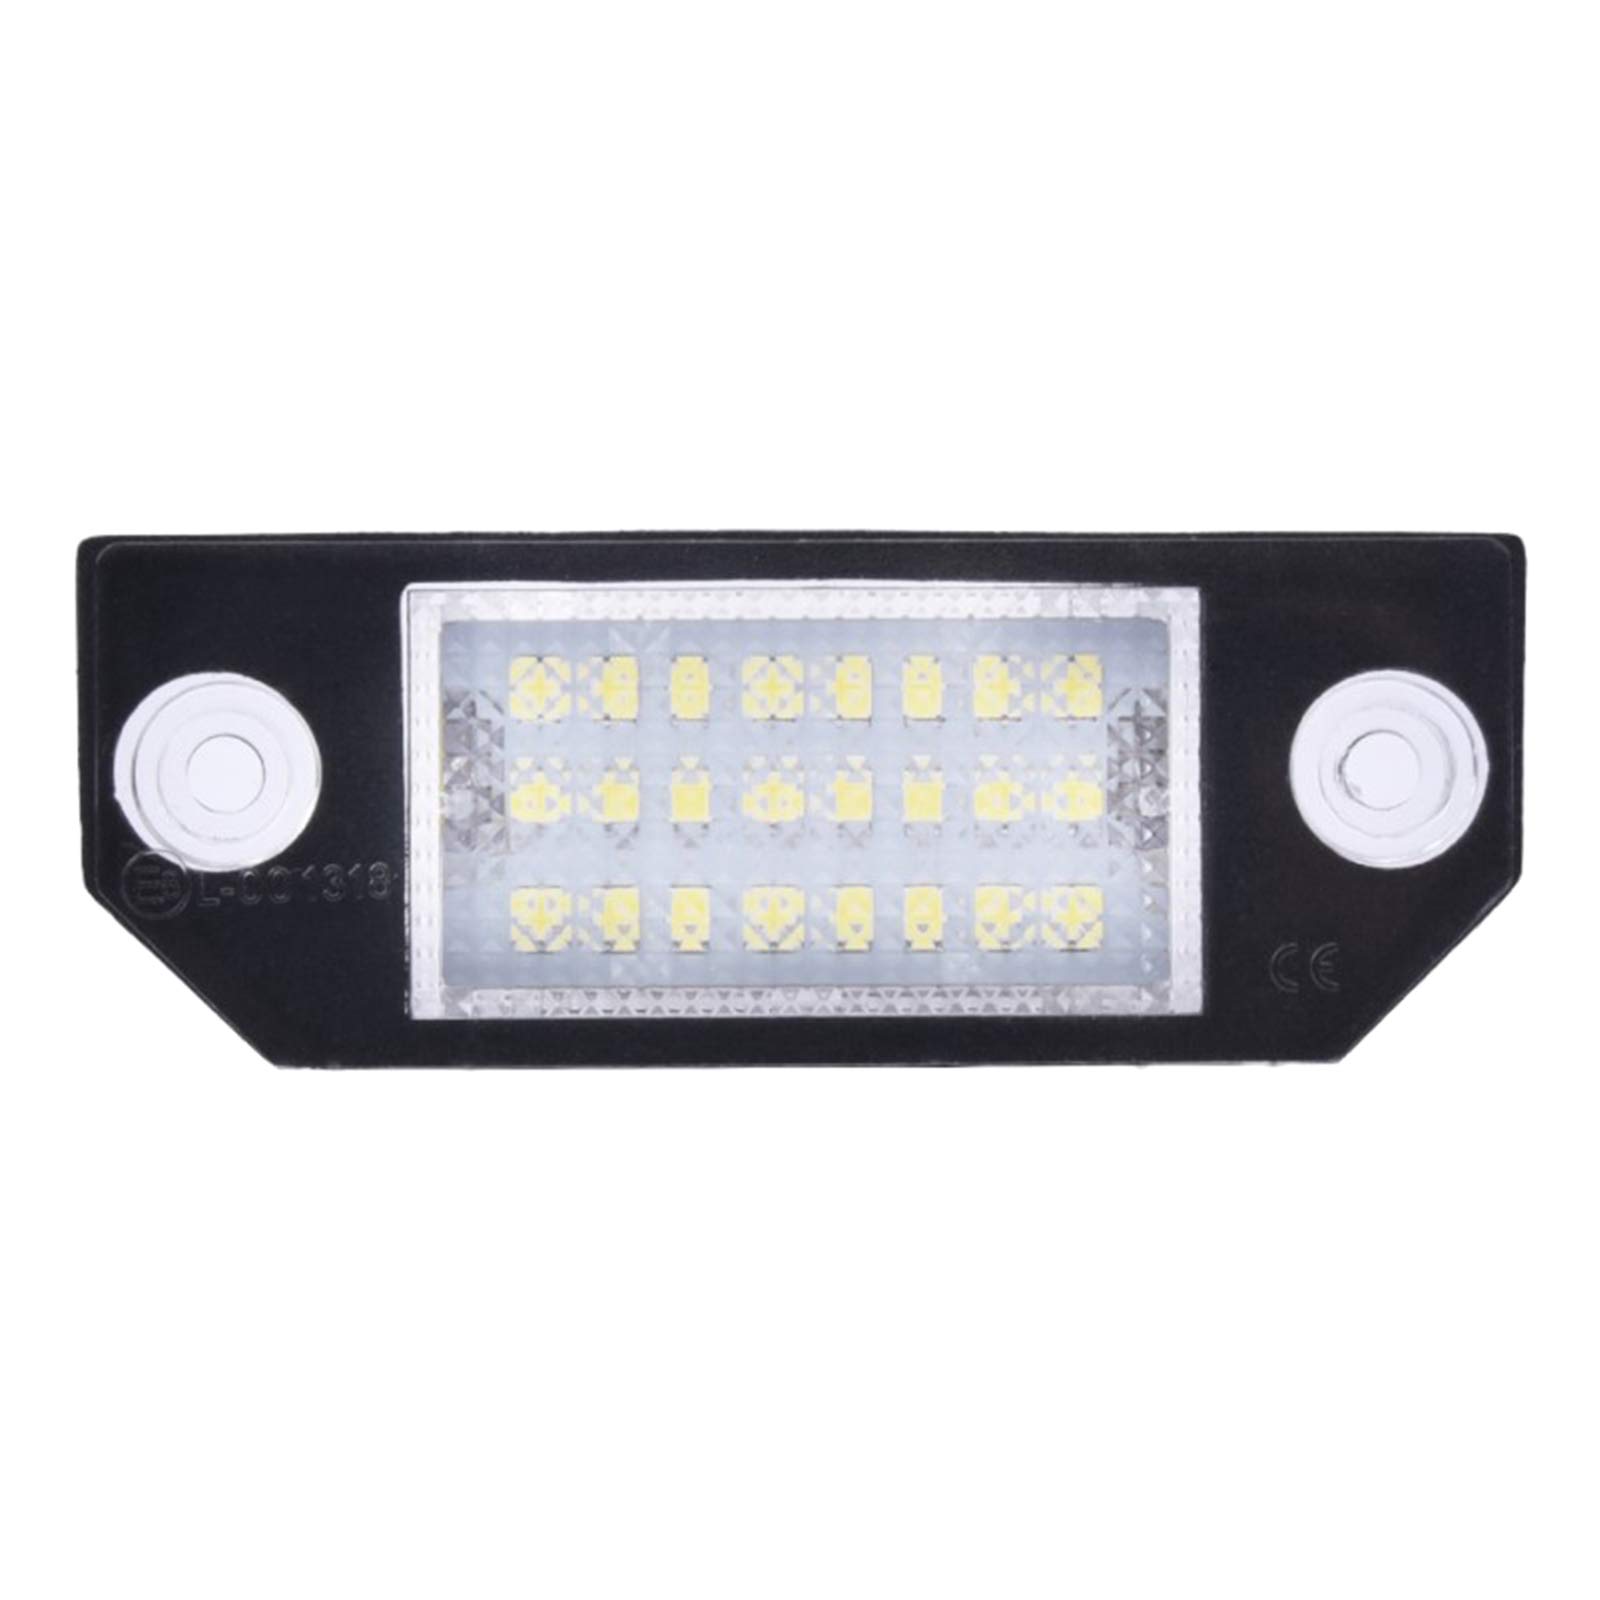 Kennzeichenbeleuchtung 12V Car LED License Number Plate Light Lamps Fit Use For Ford Focus C-Max MK2 2003-2008 License Plate Lamp External Light Bulb White Nummernschildbeleuchtung von HUYGB